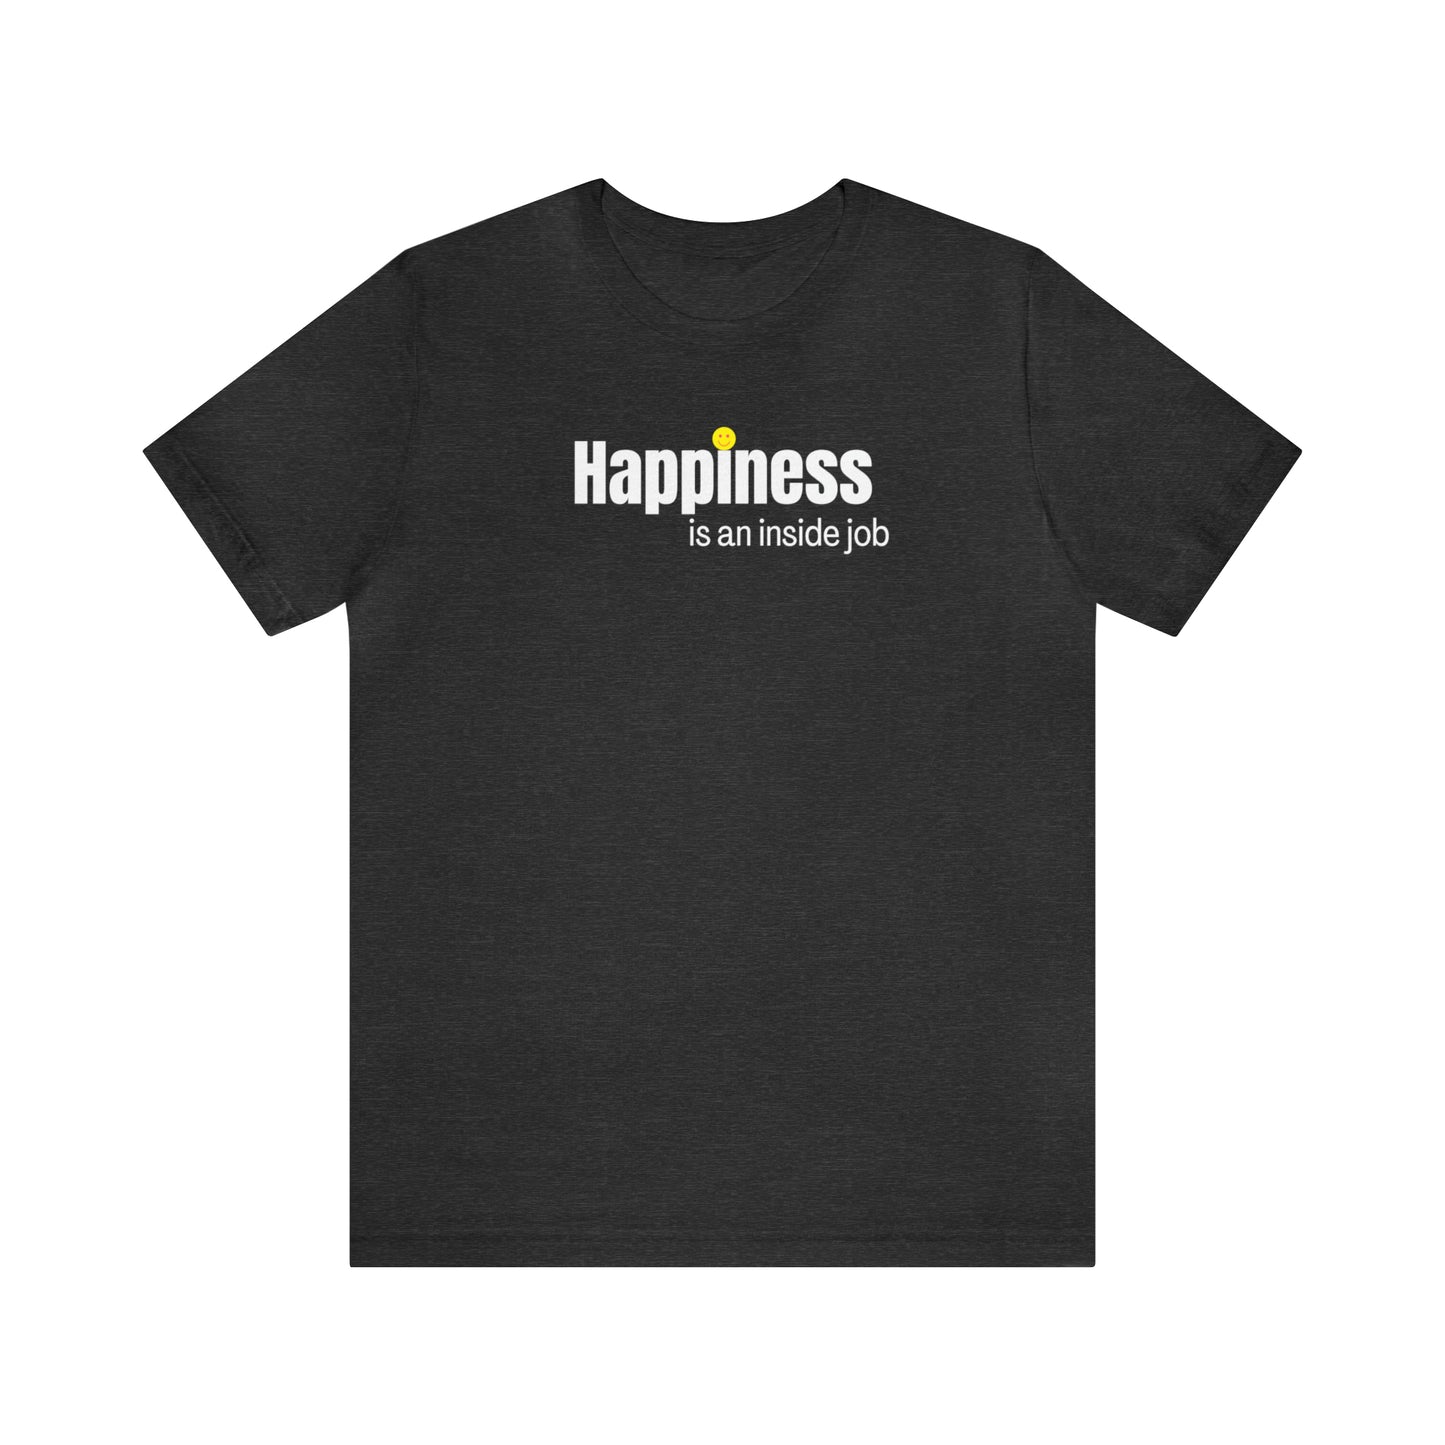 Happiness Adult Shirt for Self Love with Smiley Face - Embrace Your Diff